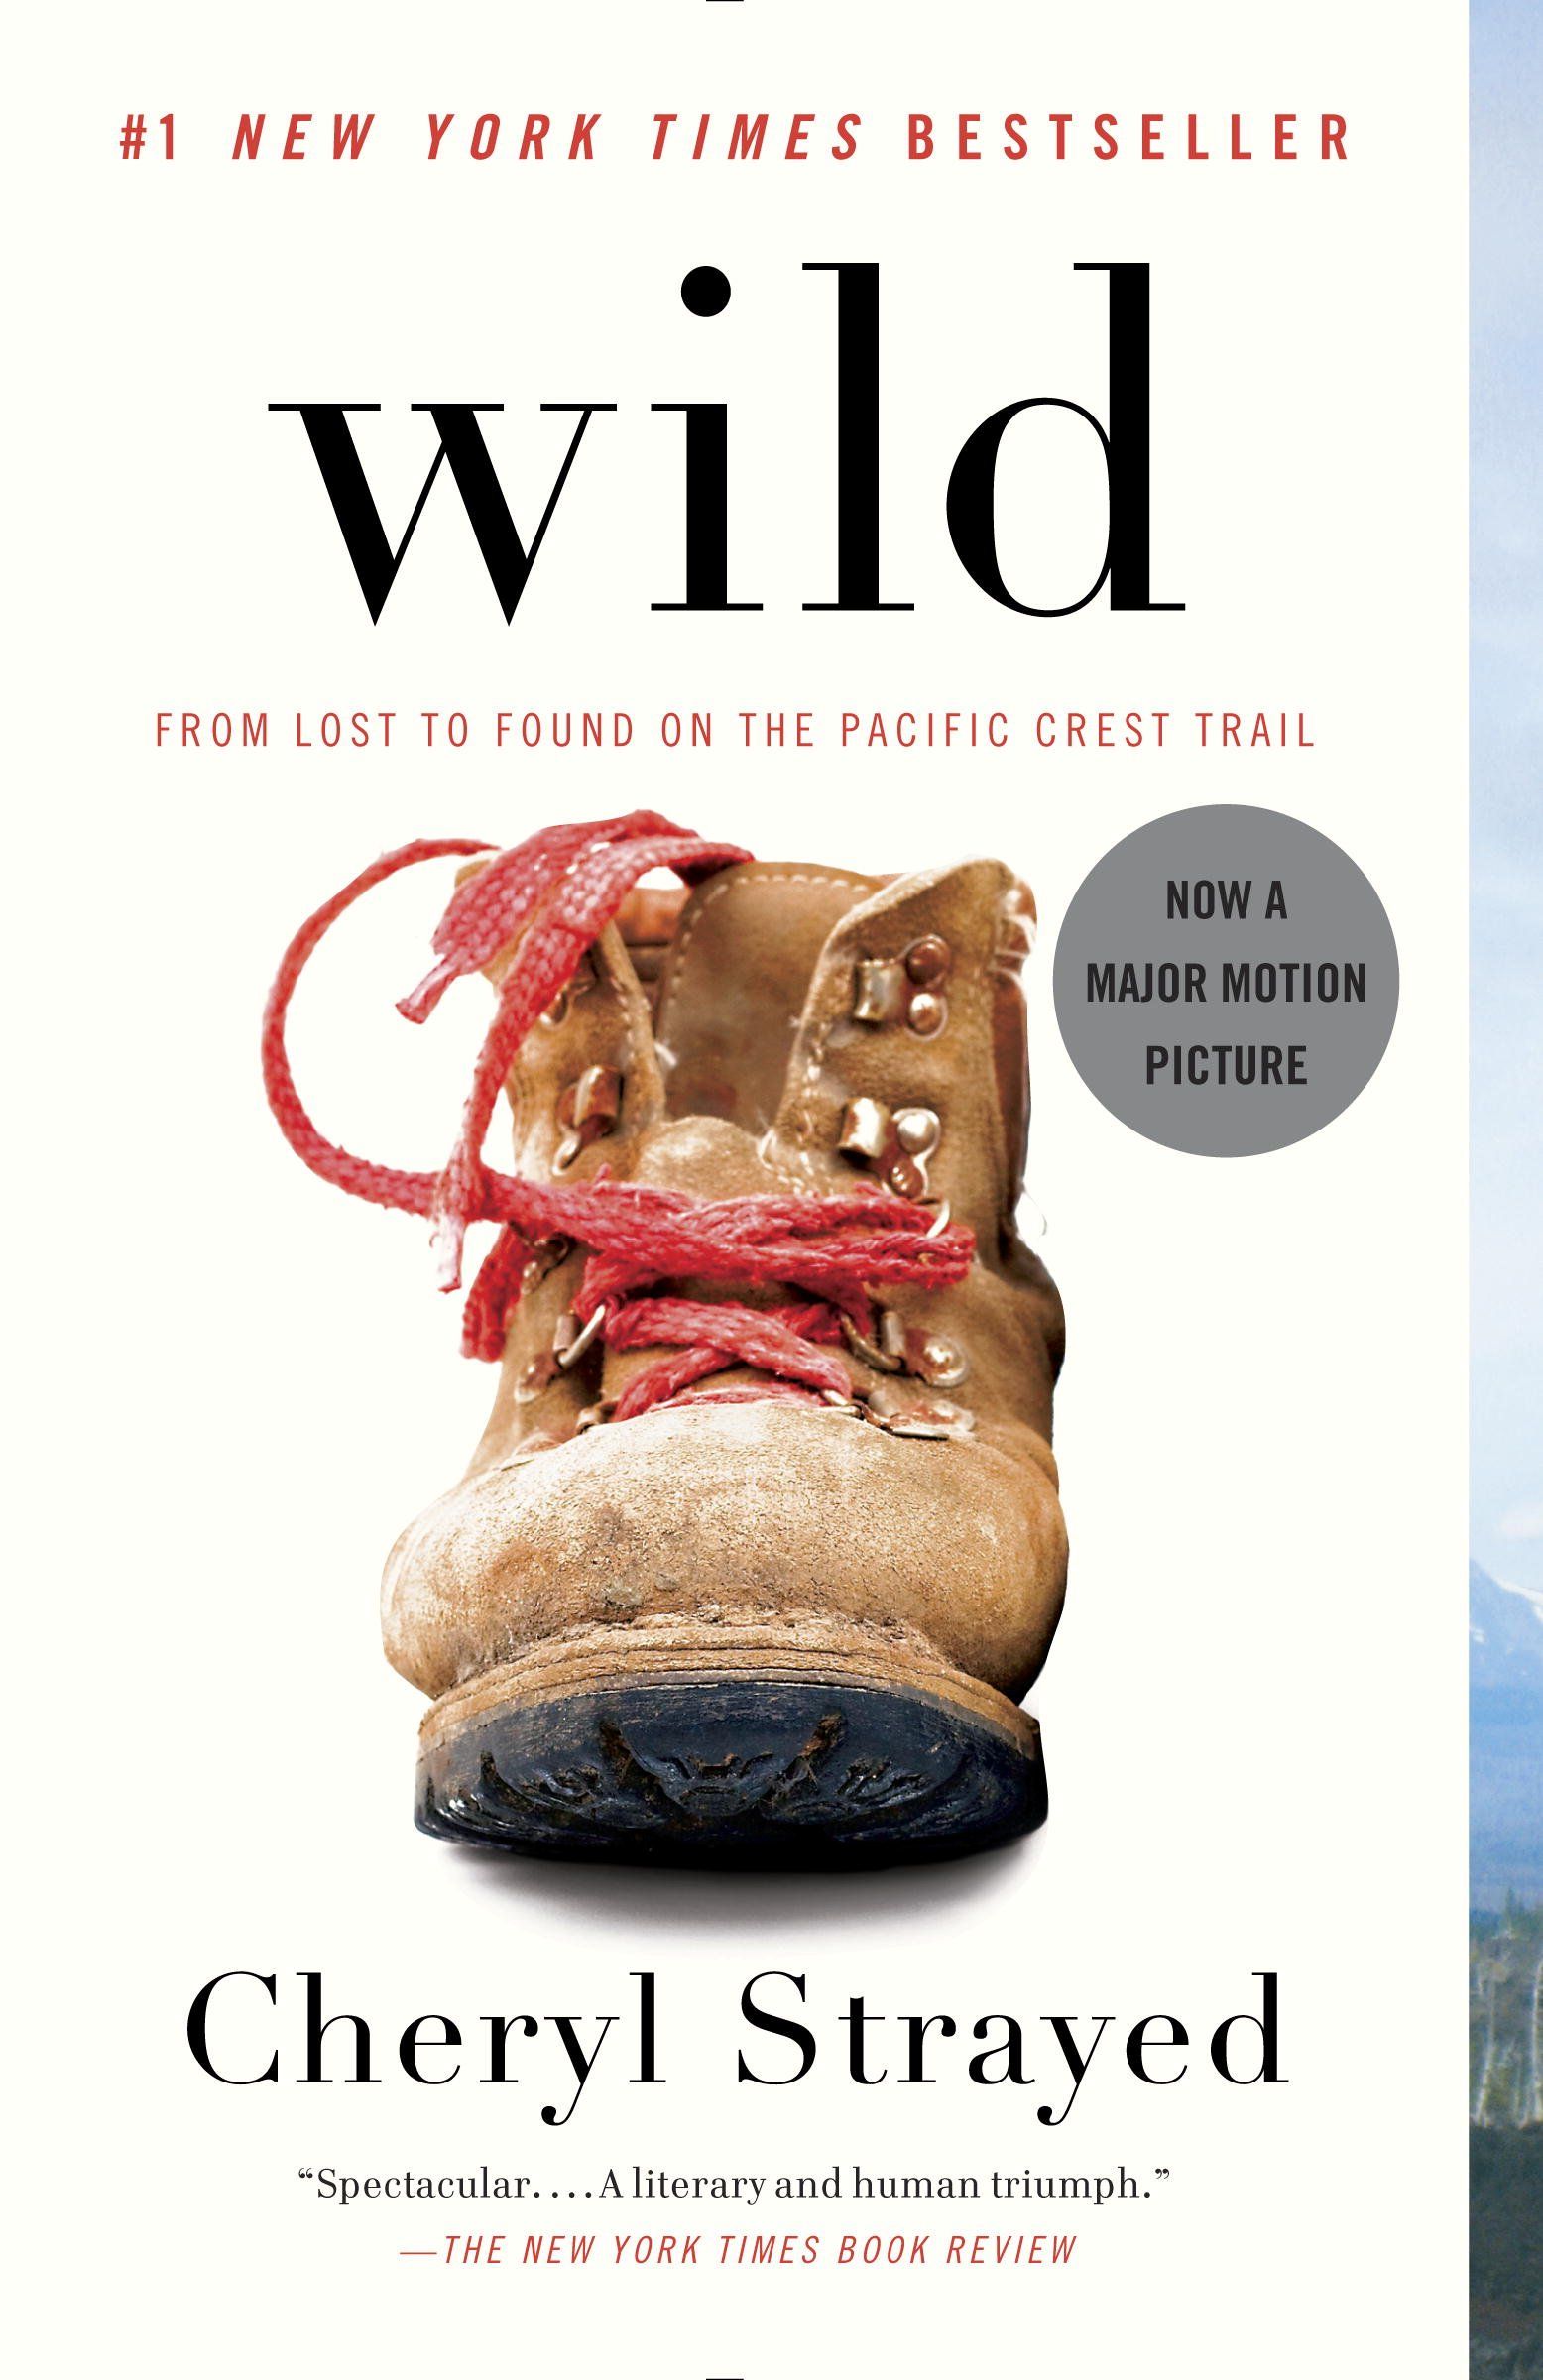 <p><strong>$14.99</strong></p><p>Be prepared to be cracked open by this moving, honest account of writer Cheryl Strayed’s 1,100-mile solo hike at the age of 22 along the Pacific Crest Trail. Propelled by sheer willpower after her mother died and her marriage dissipated, Strayed set off on the physically and mentally taxing journey with no “experience or training” but was healed by nature in the process. The memoir was selected for Oprah’s Book Club 2.0 and made into an Oscar-nominated film starring Reese Witherspoon, so you know it’s good.</p>